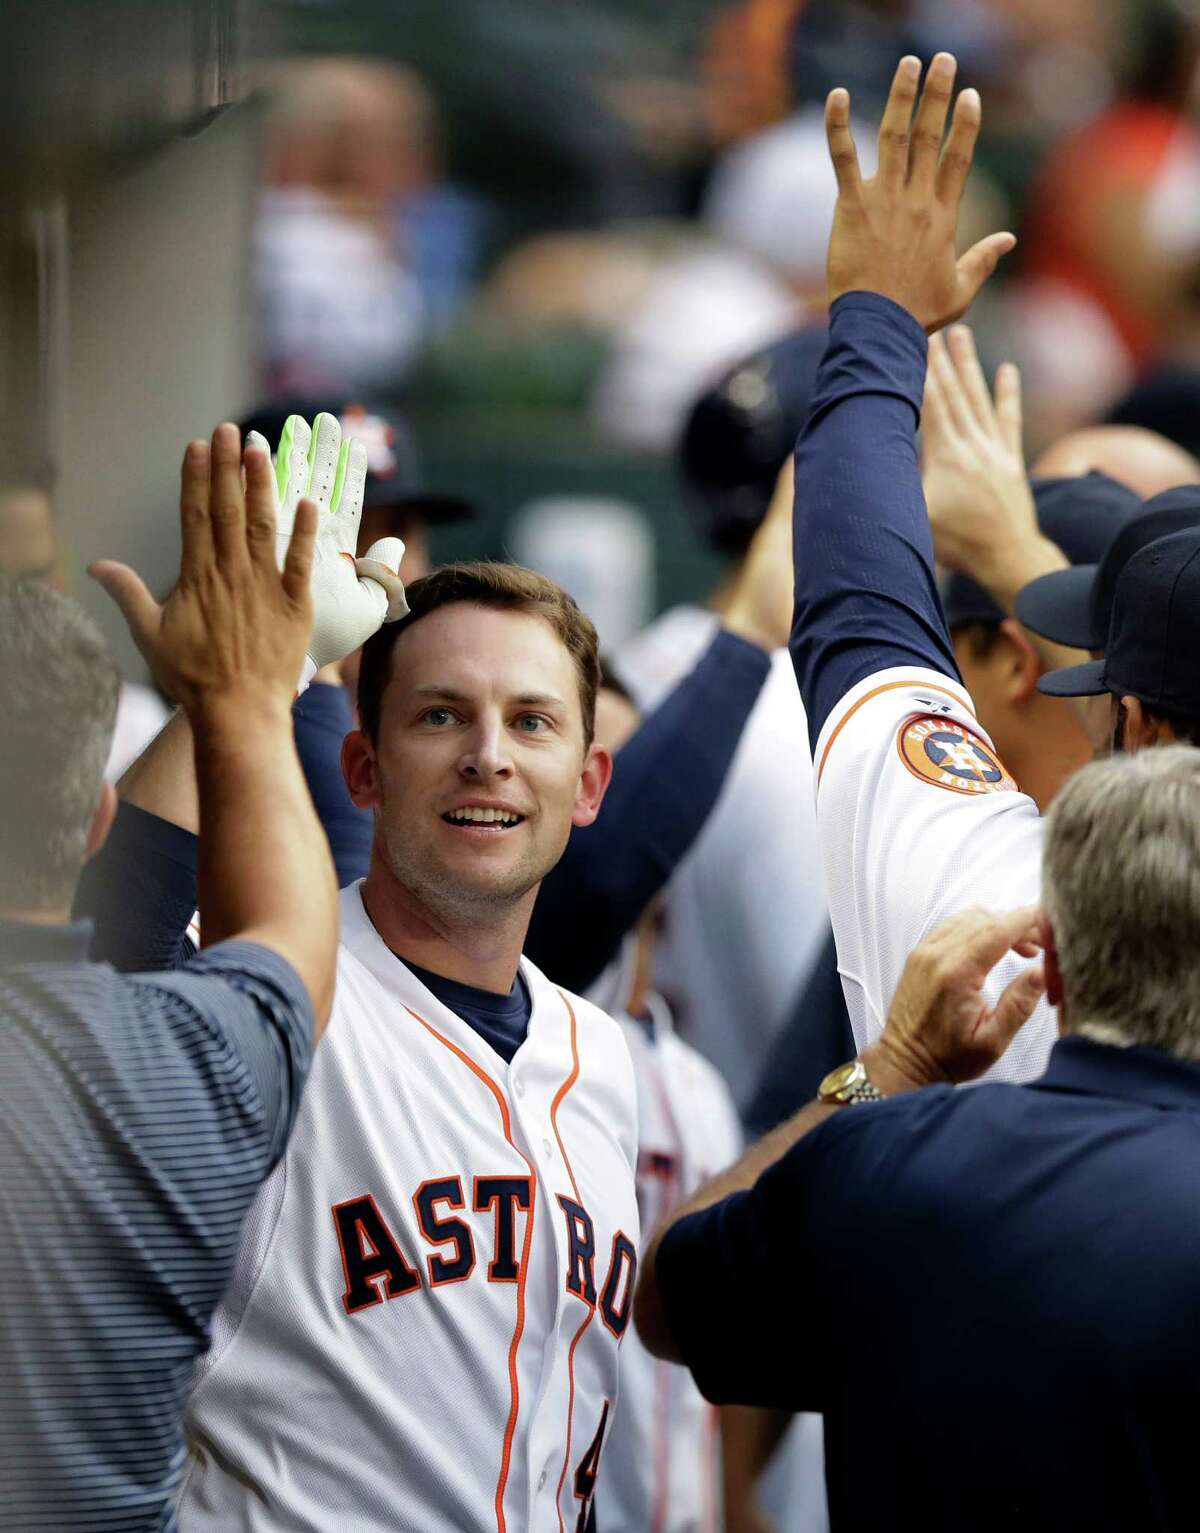 Houston Astros' Jed Lowrie is congratulated after hitting a two-run home run against the Oakland Athletics during the first inning of a baseball game Wednesday, April 15, 2015, in Houston. (AP Photo/Pat Sullivan)